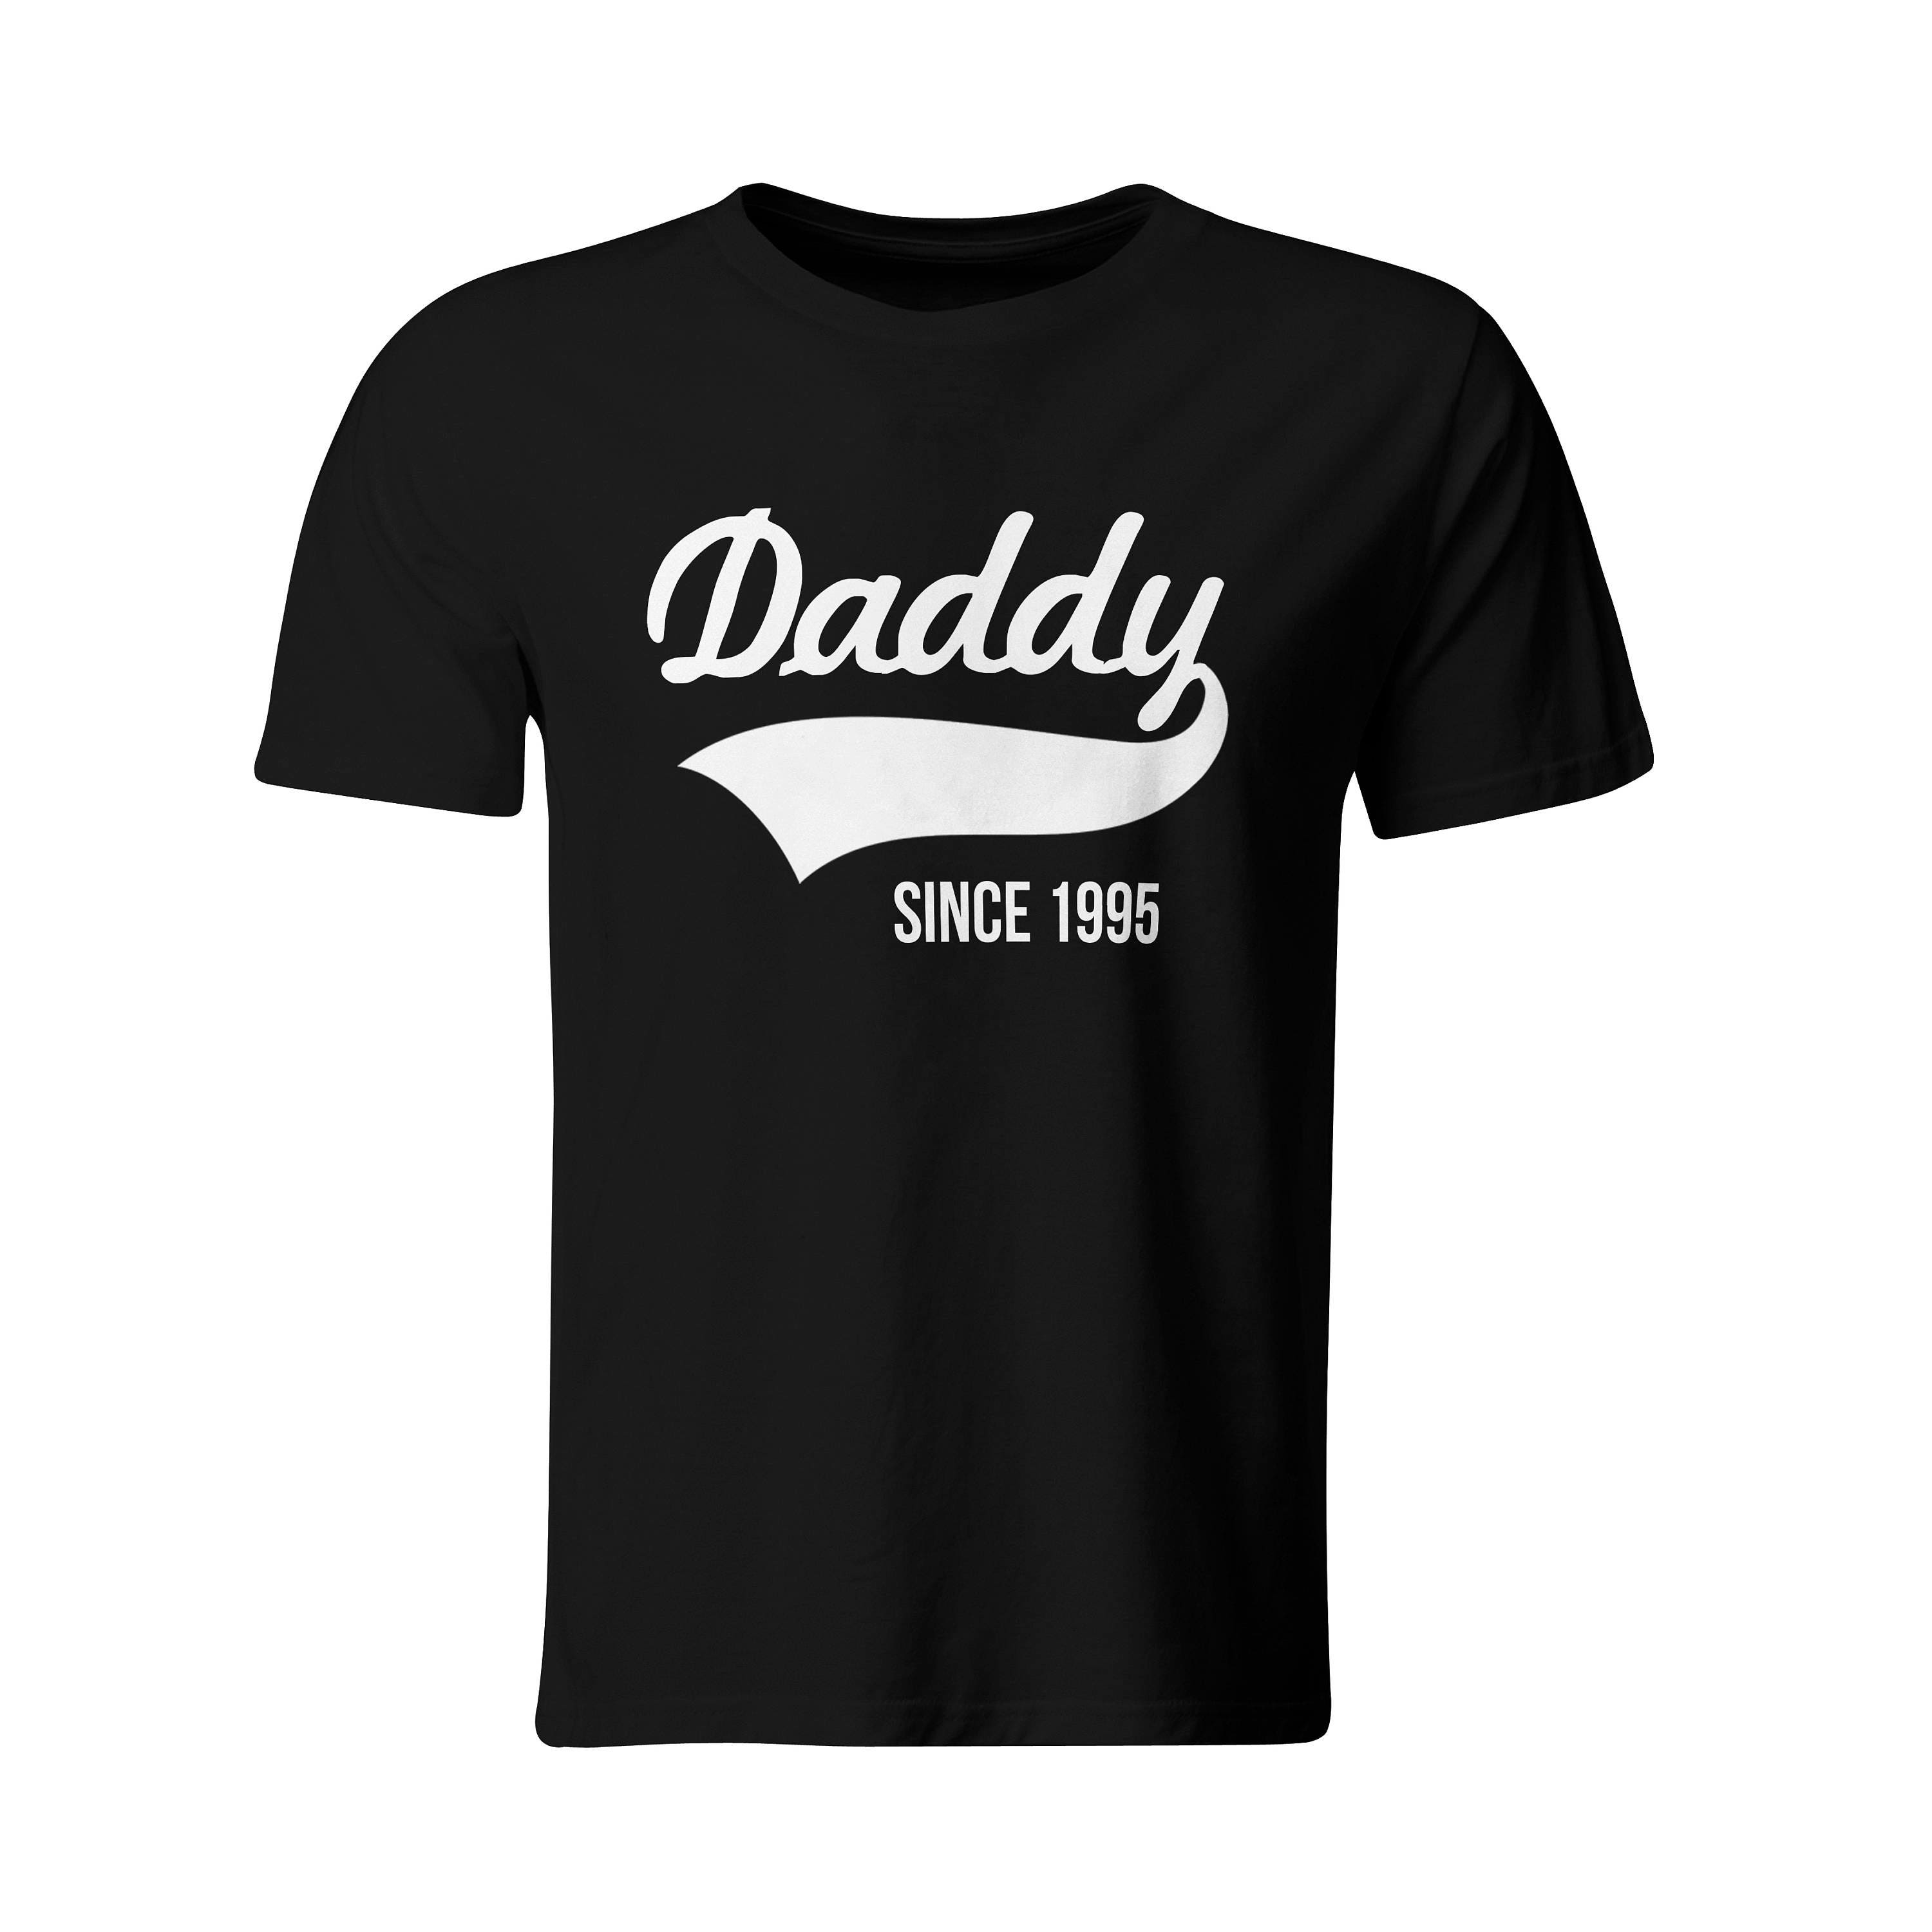 Gift for Dad Black Tshirt Daddy Since Personalized Tee New | Etsy